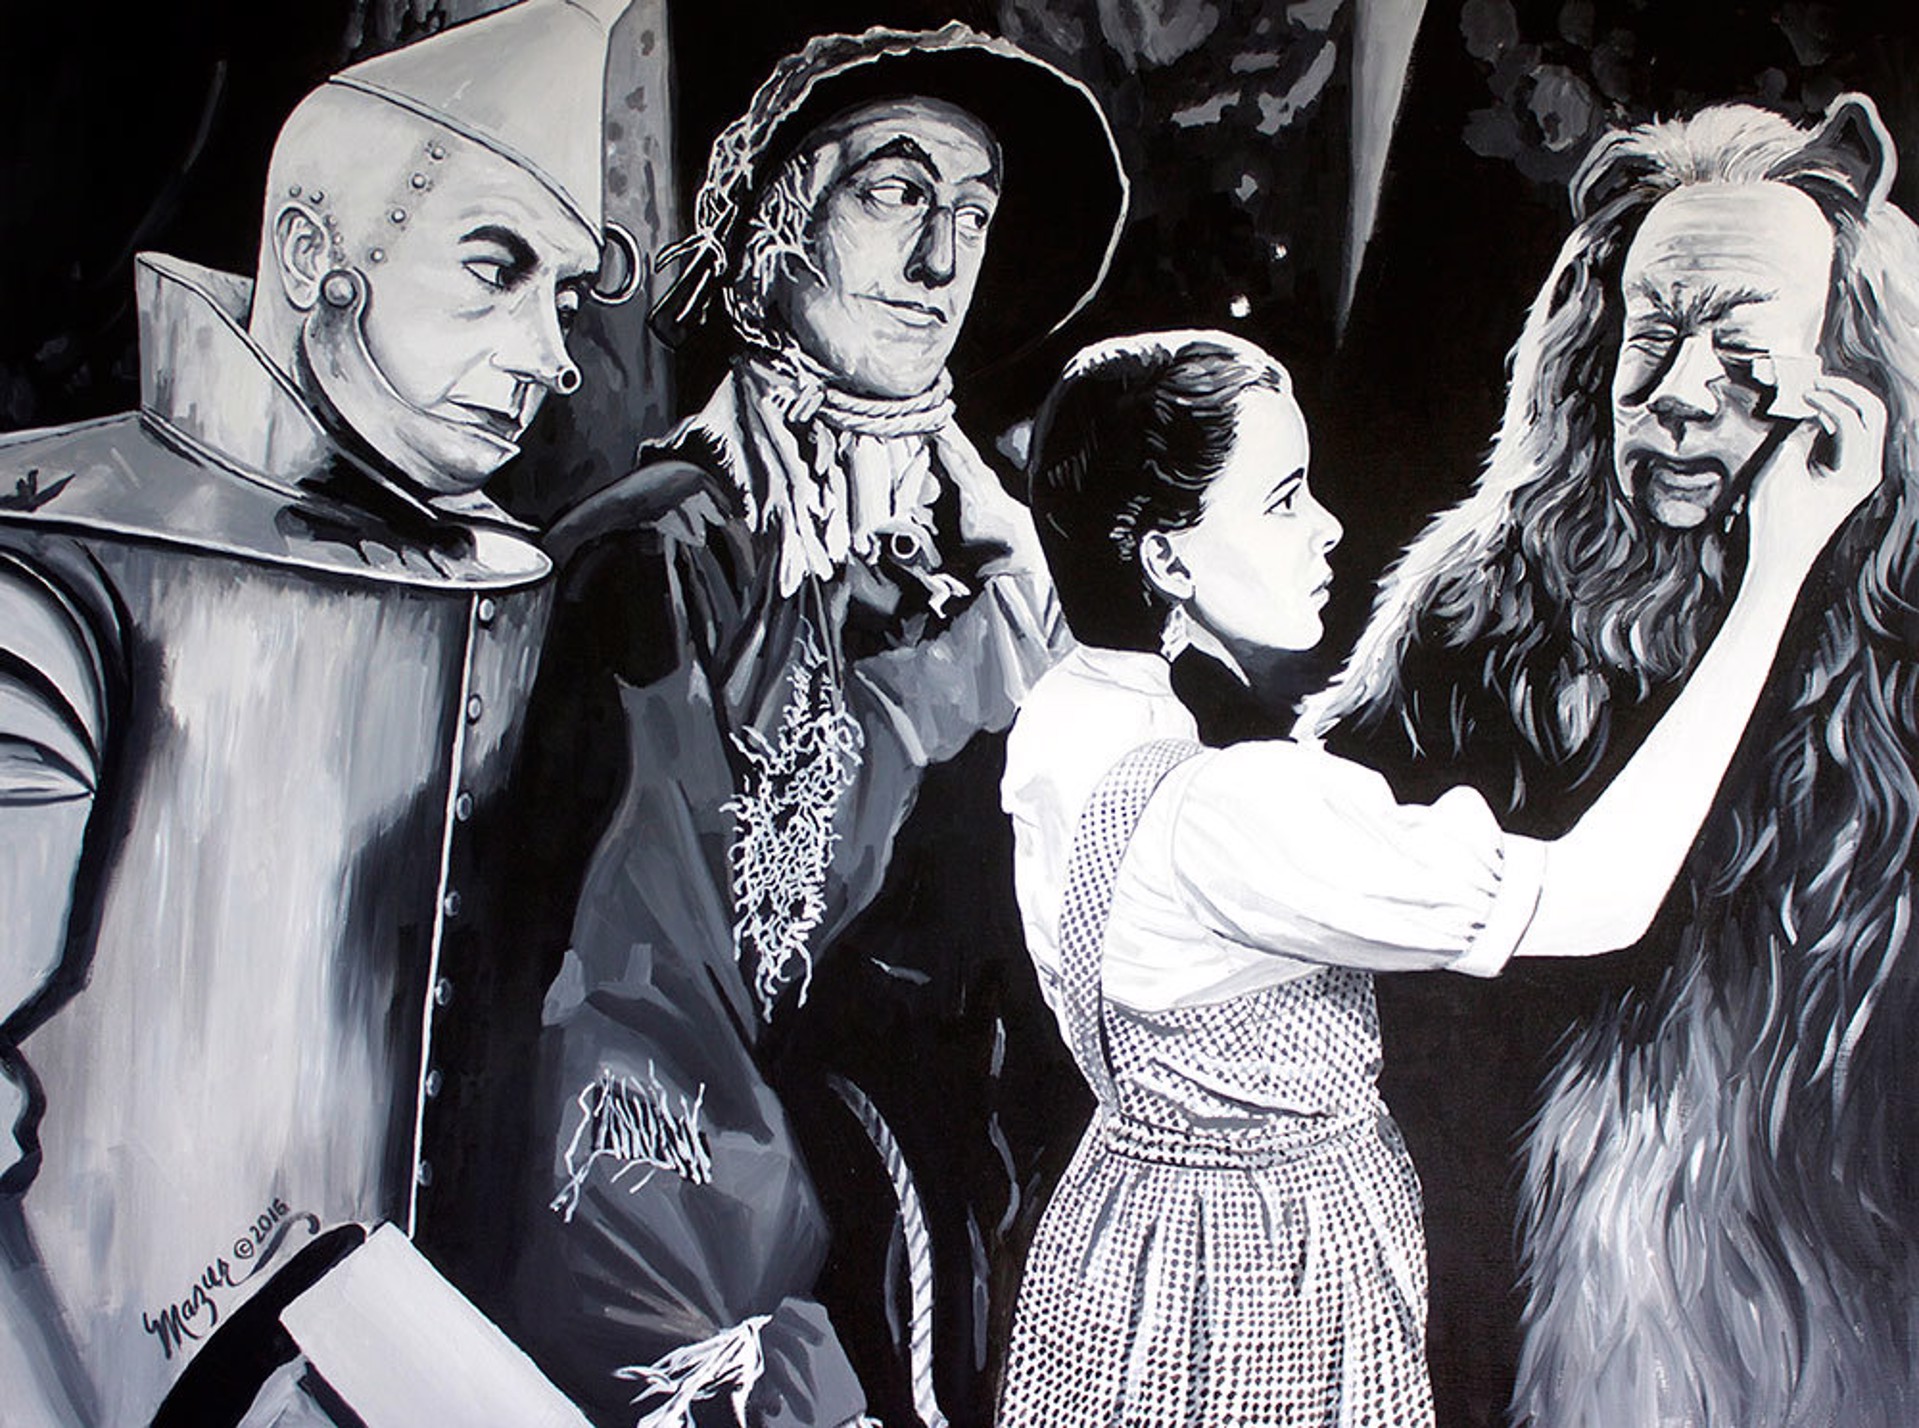 Courage The Wizard of Oz by Ruby Mazur